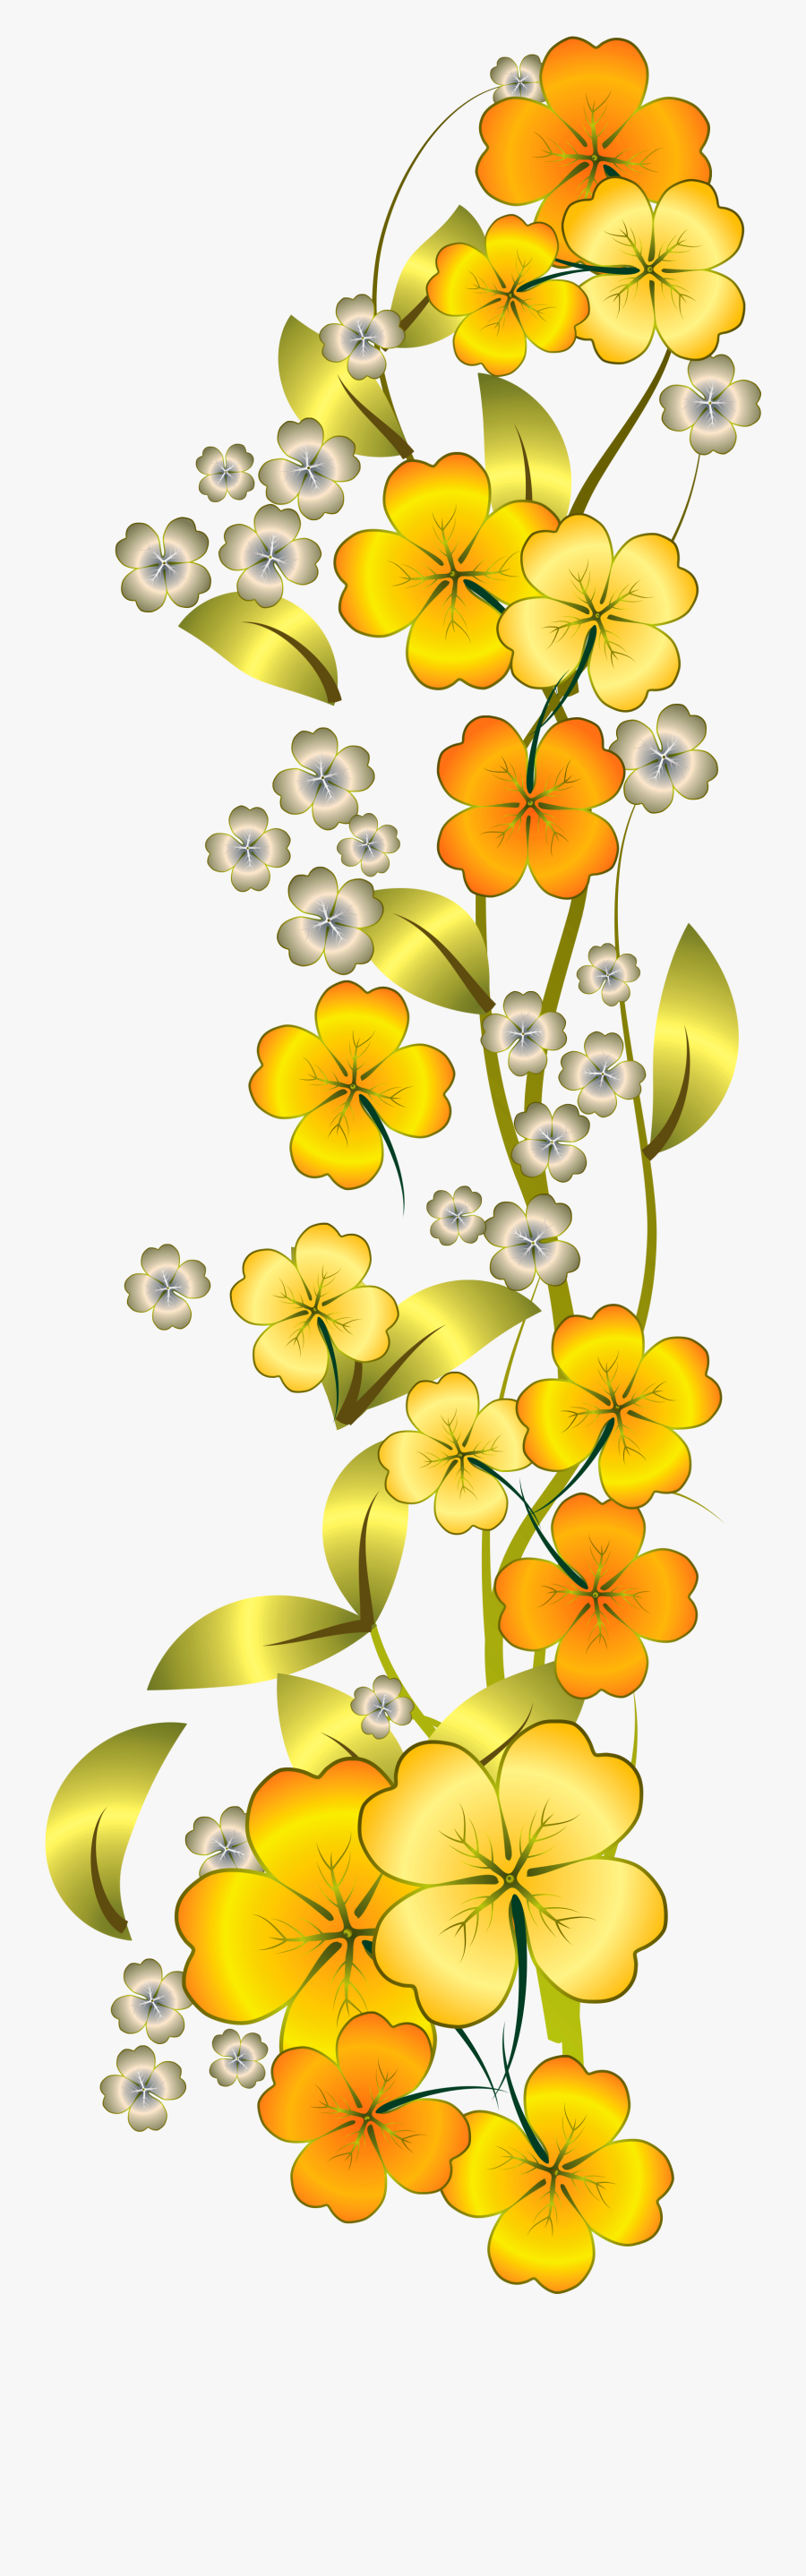 Yellow Flower Decor Png Clipart - Yellow Flowers Clipart, Transparent Clipart